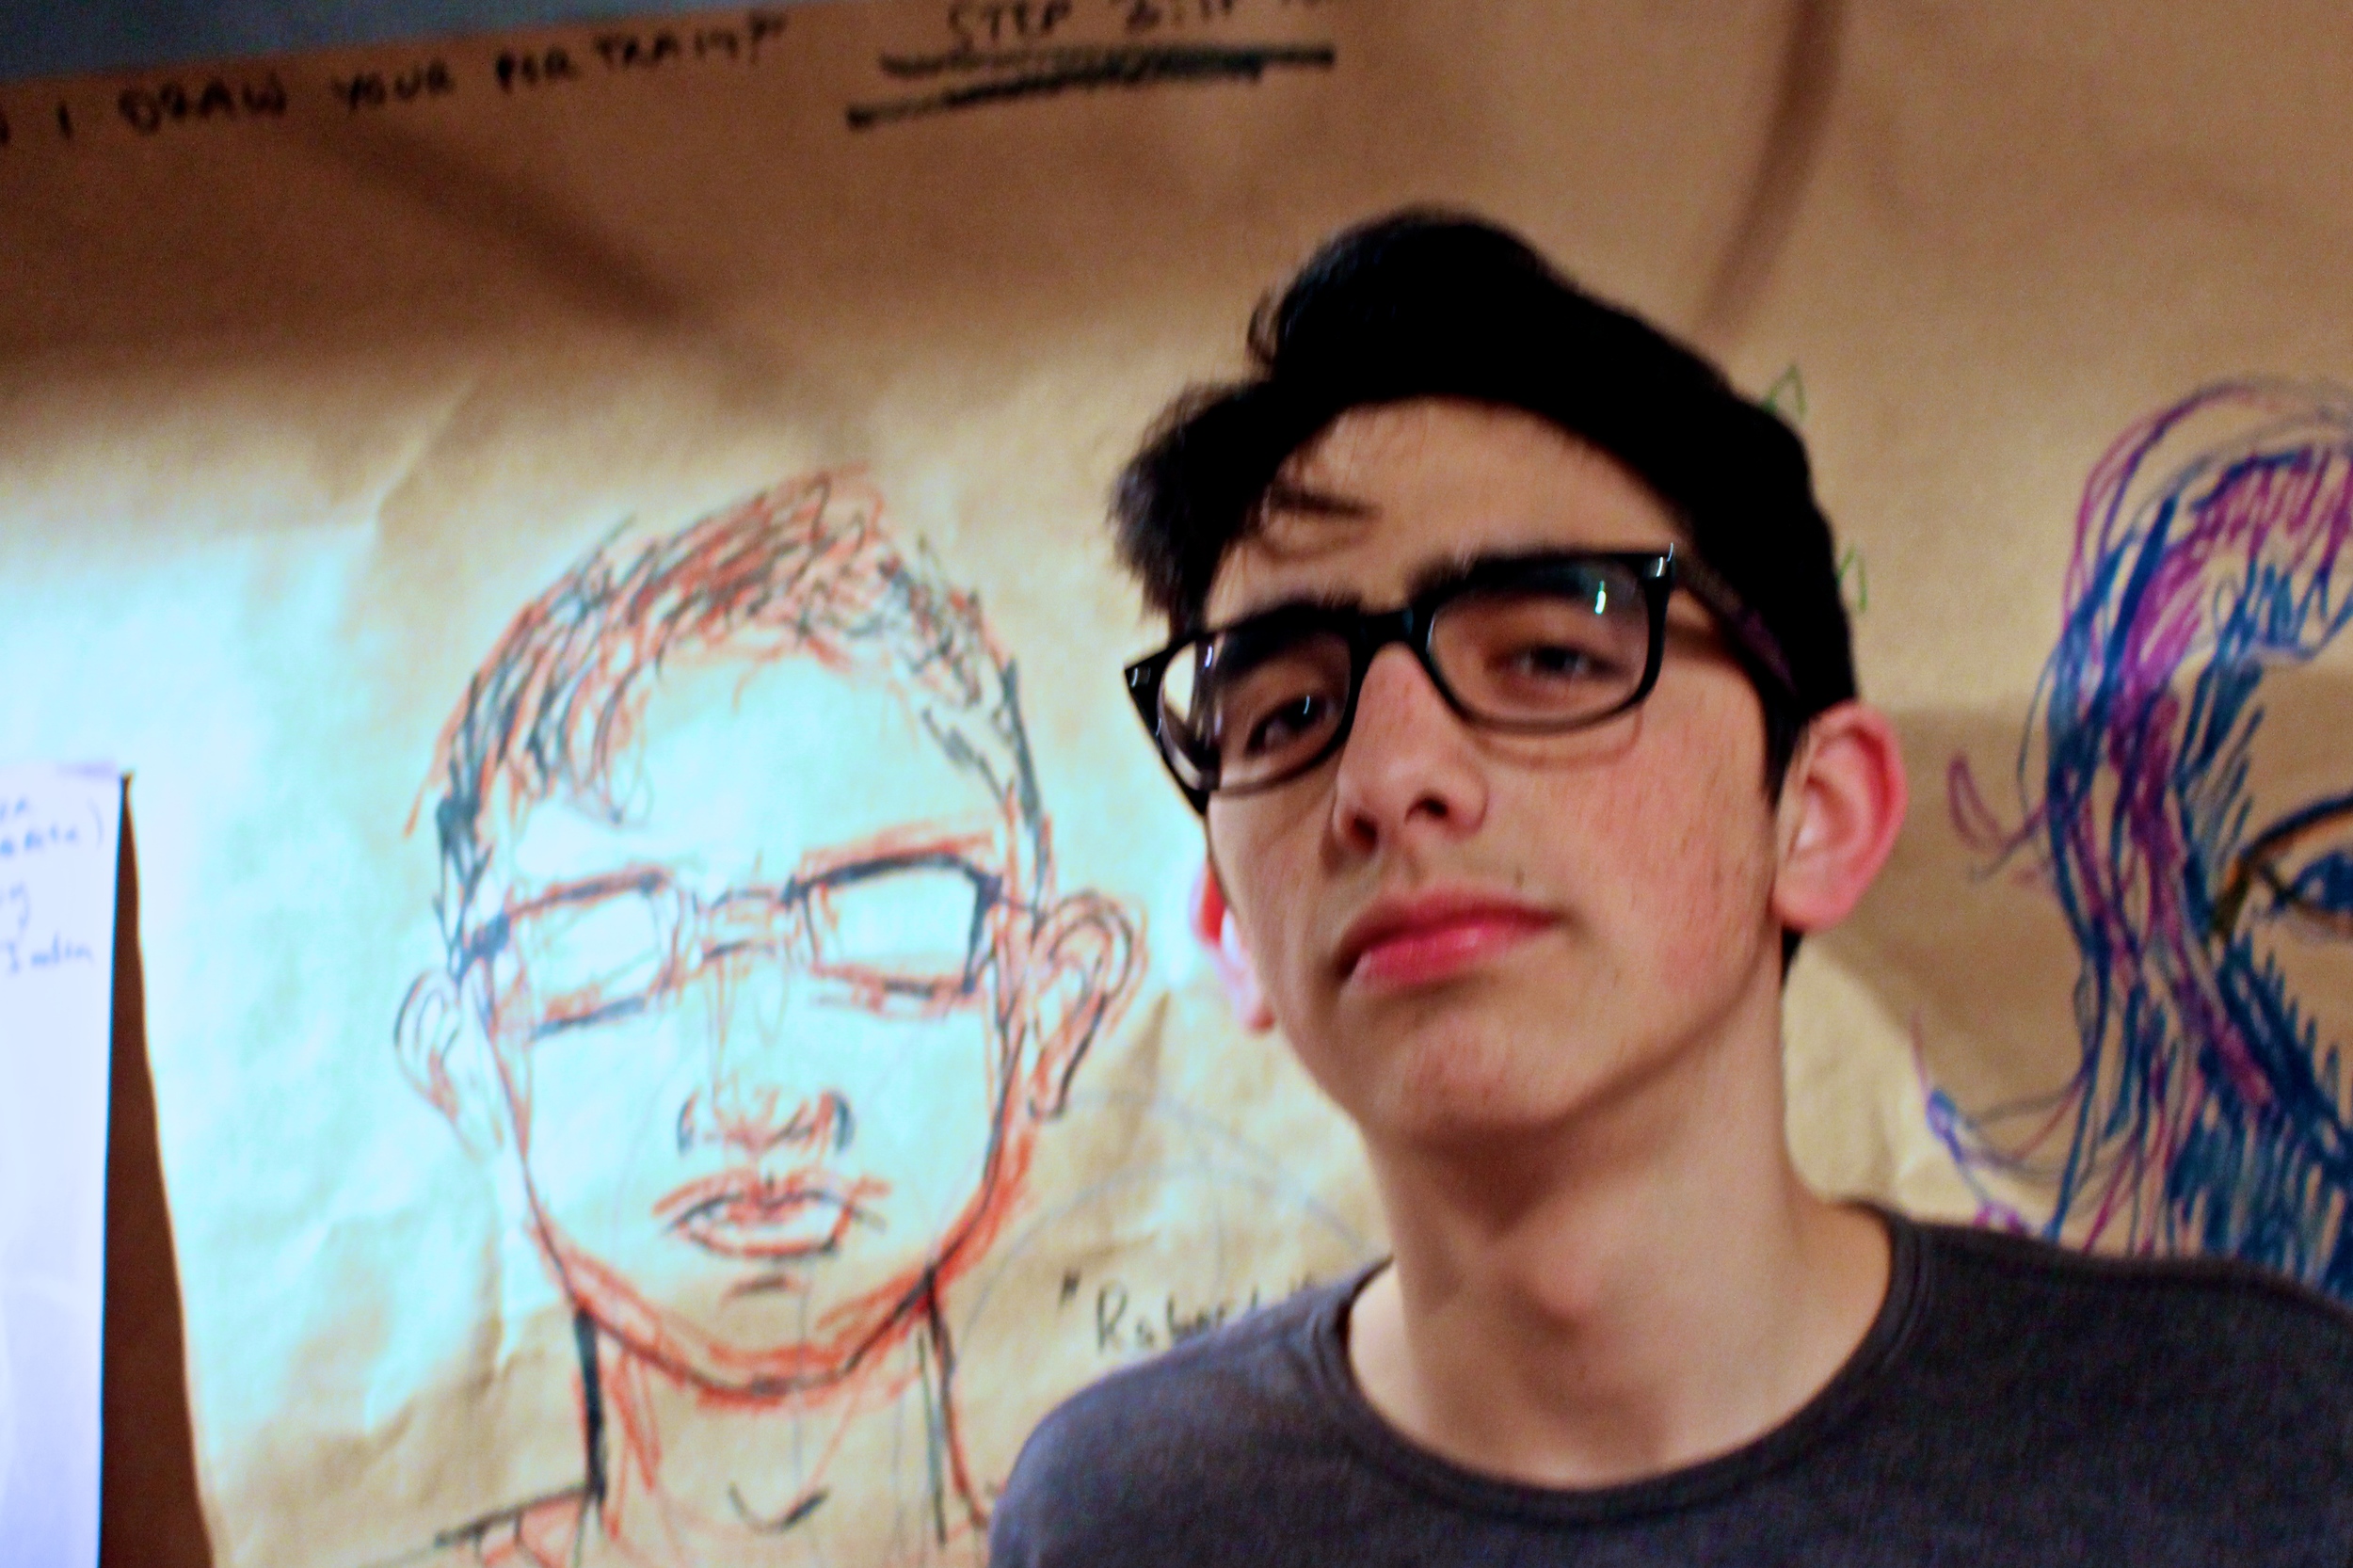  Roberto Rochin '17 poses next to a portrait drawn by Lilly Rosner '14 